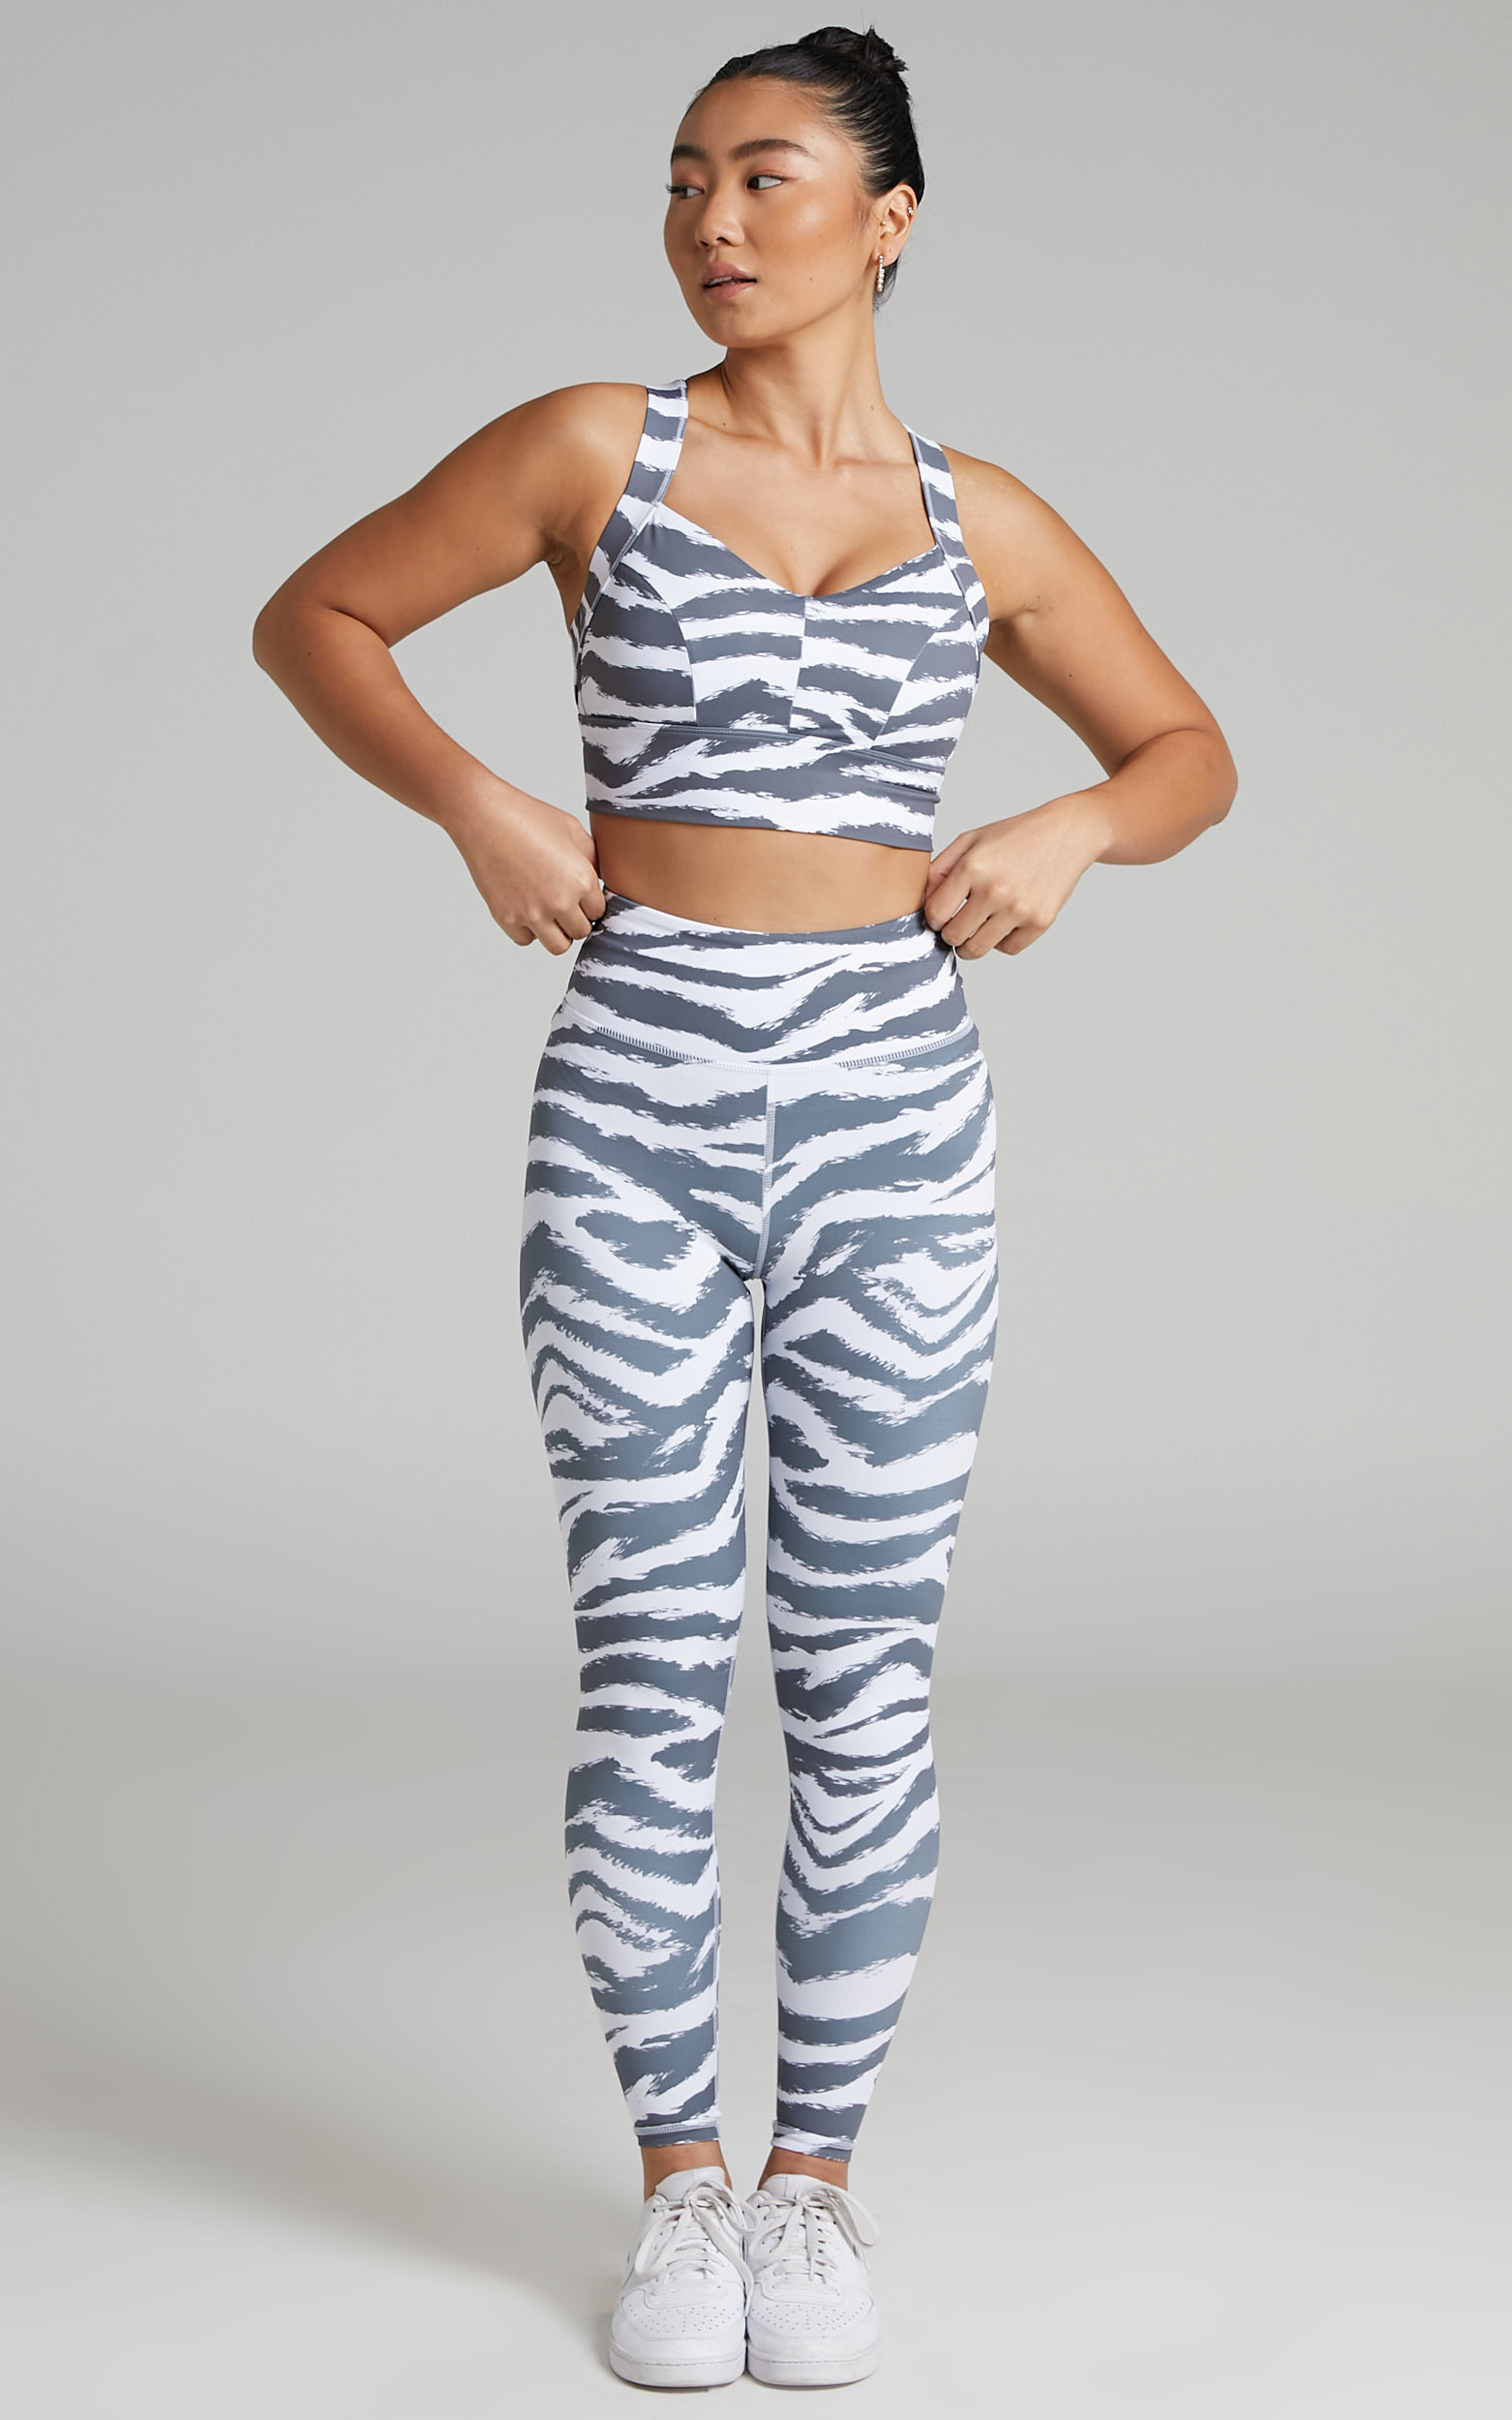 Lilybod - Ariana Legging in Snow Tiger Print - L, WHT1, hi-res image number null